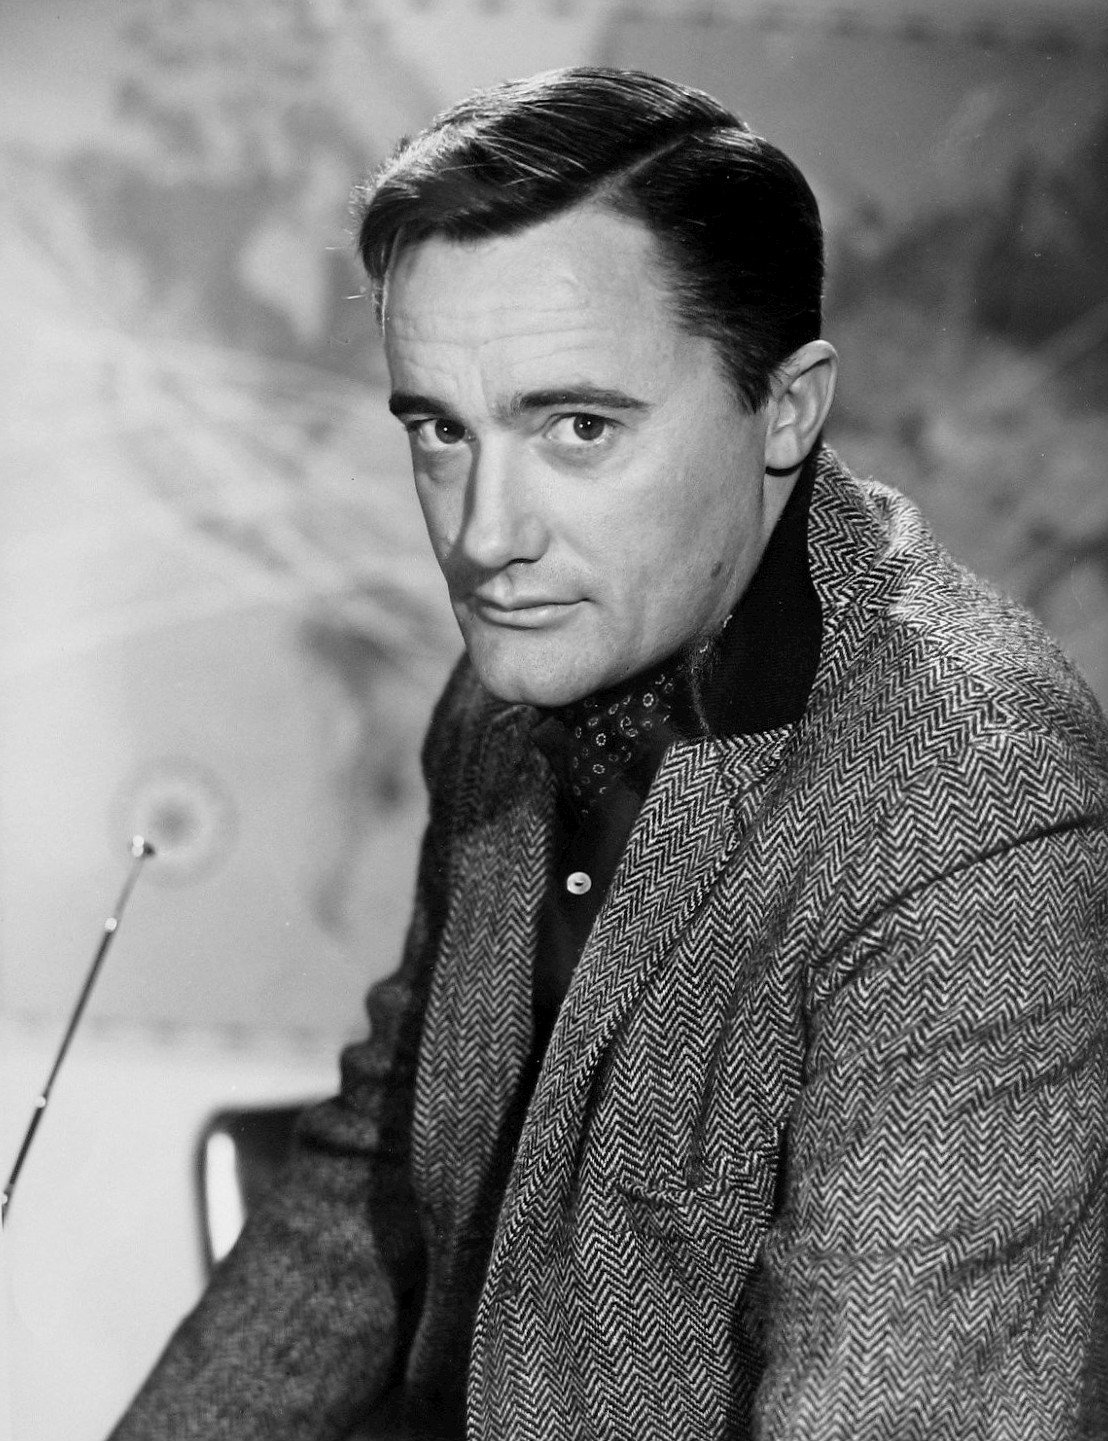 Photo of Robert Vaughn from the television program The Man From U.N.C.L.E. | Photo: NBC Television, Public domain, via Wikimedia Commons